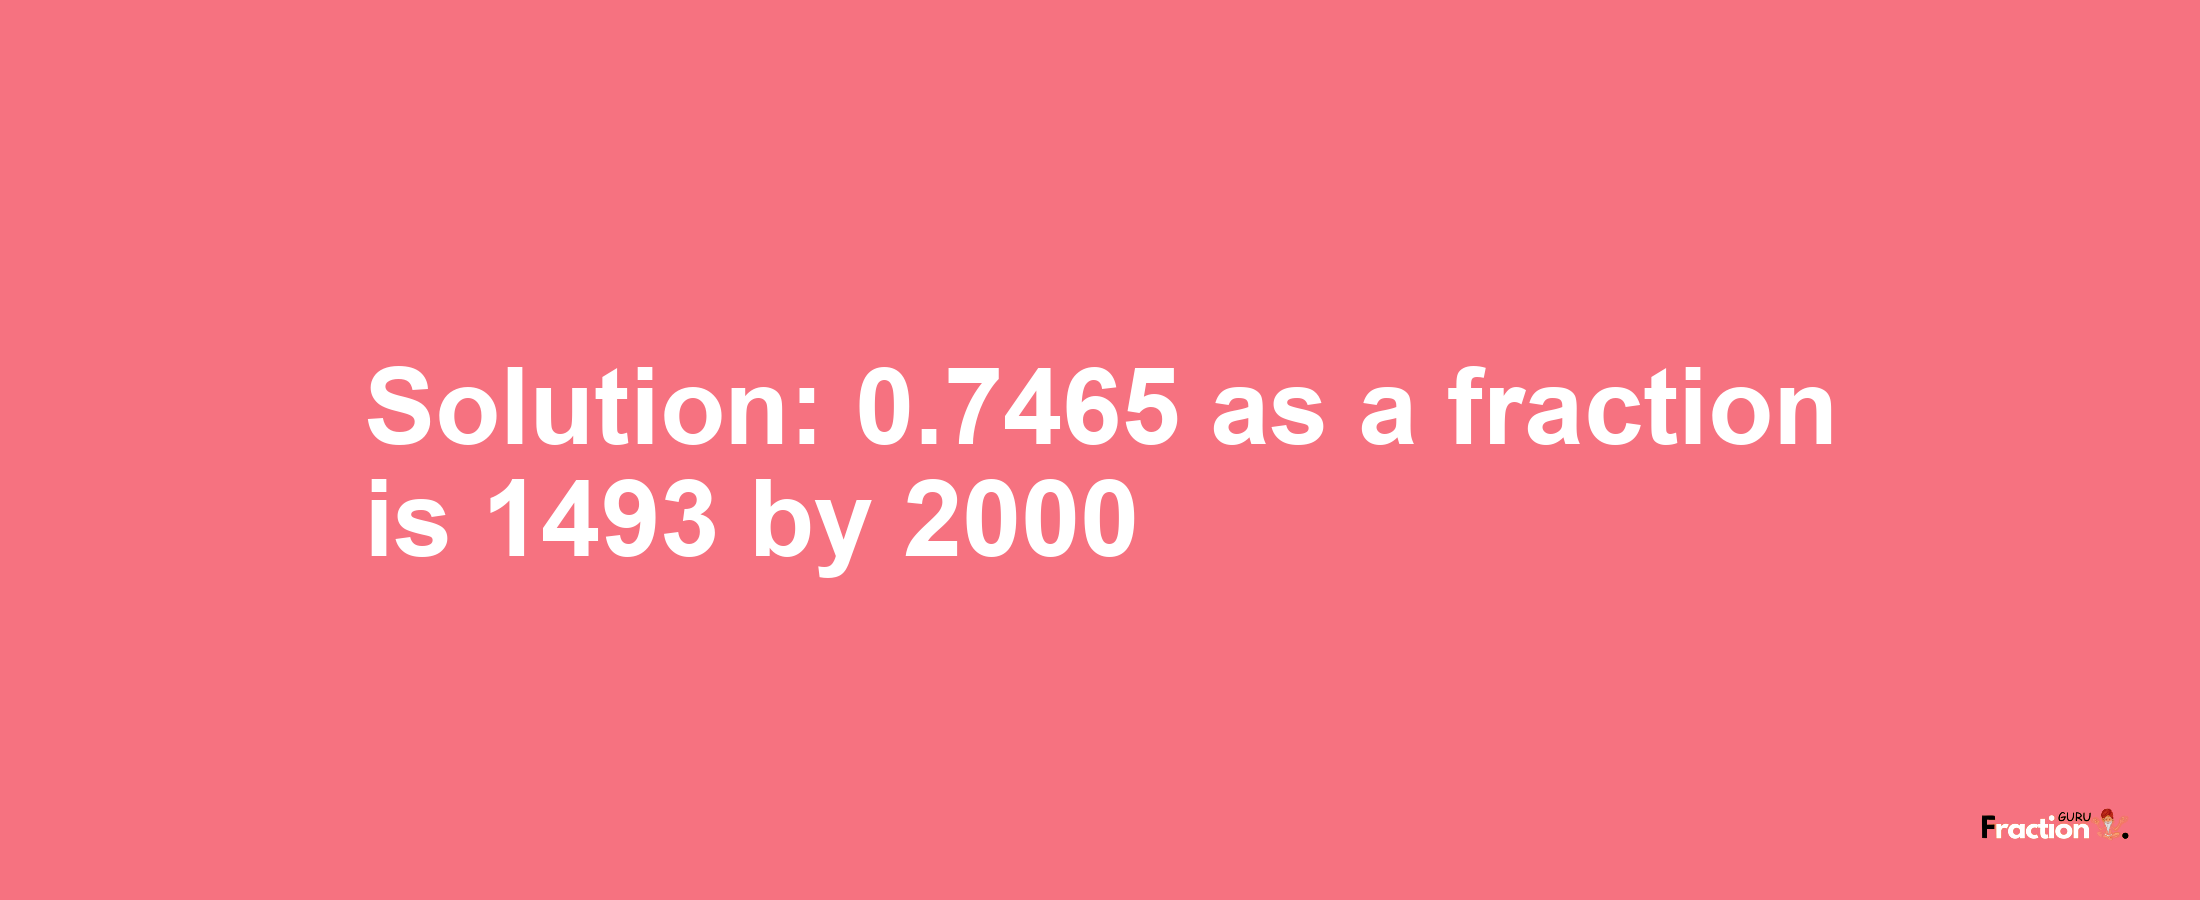 Solution:0.7465 as a fraction is 1493/2000